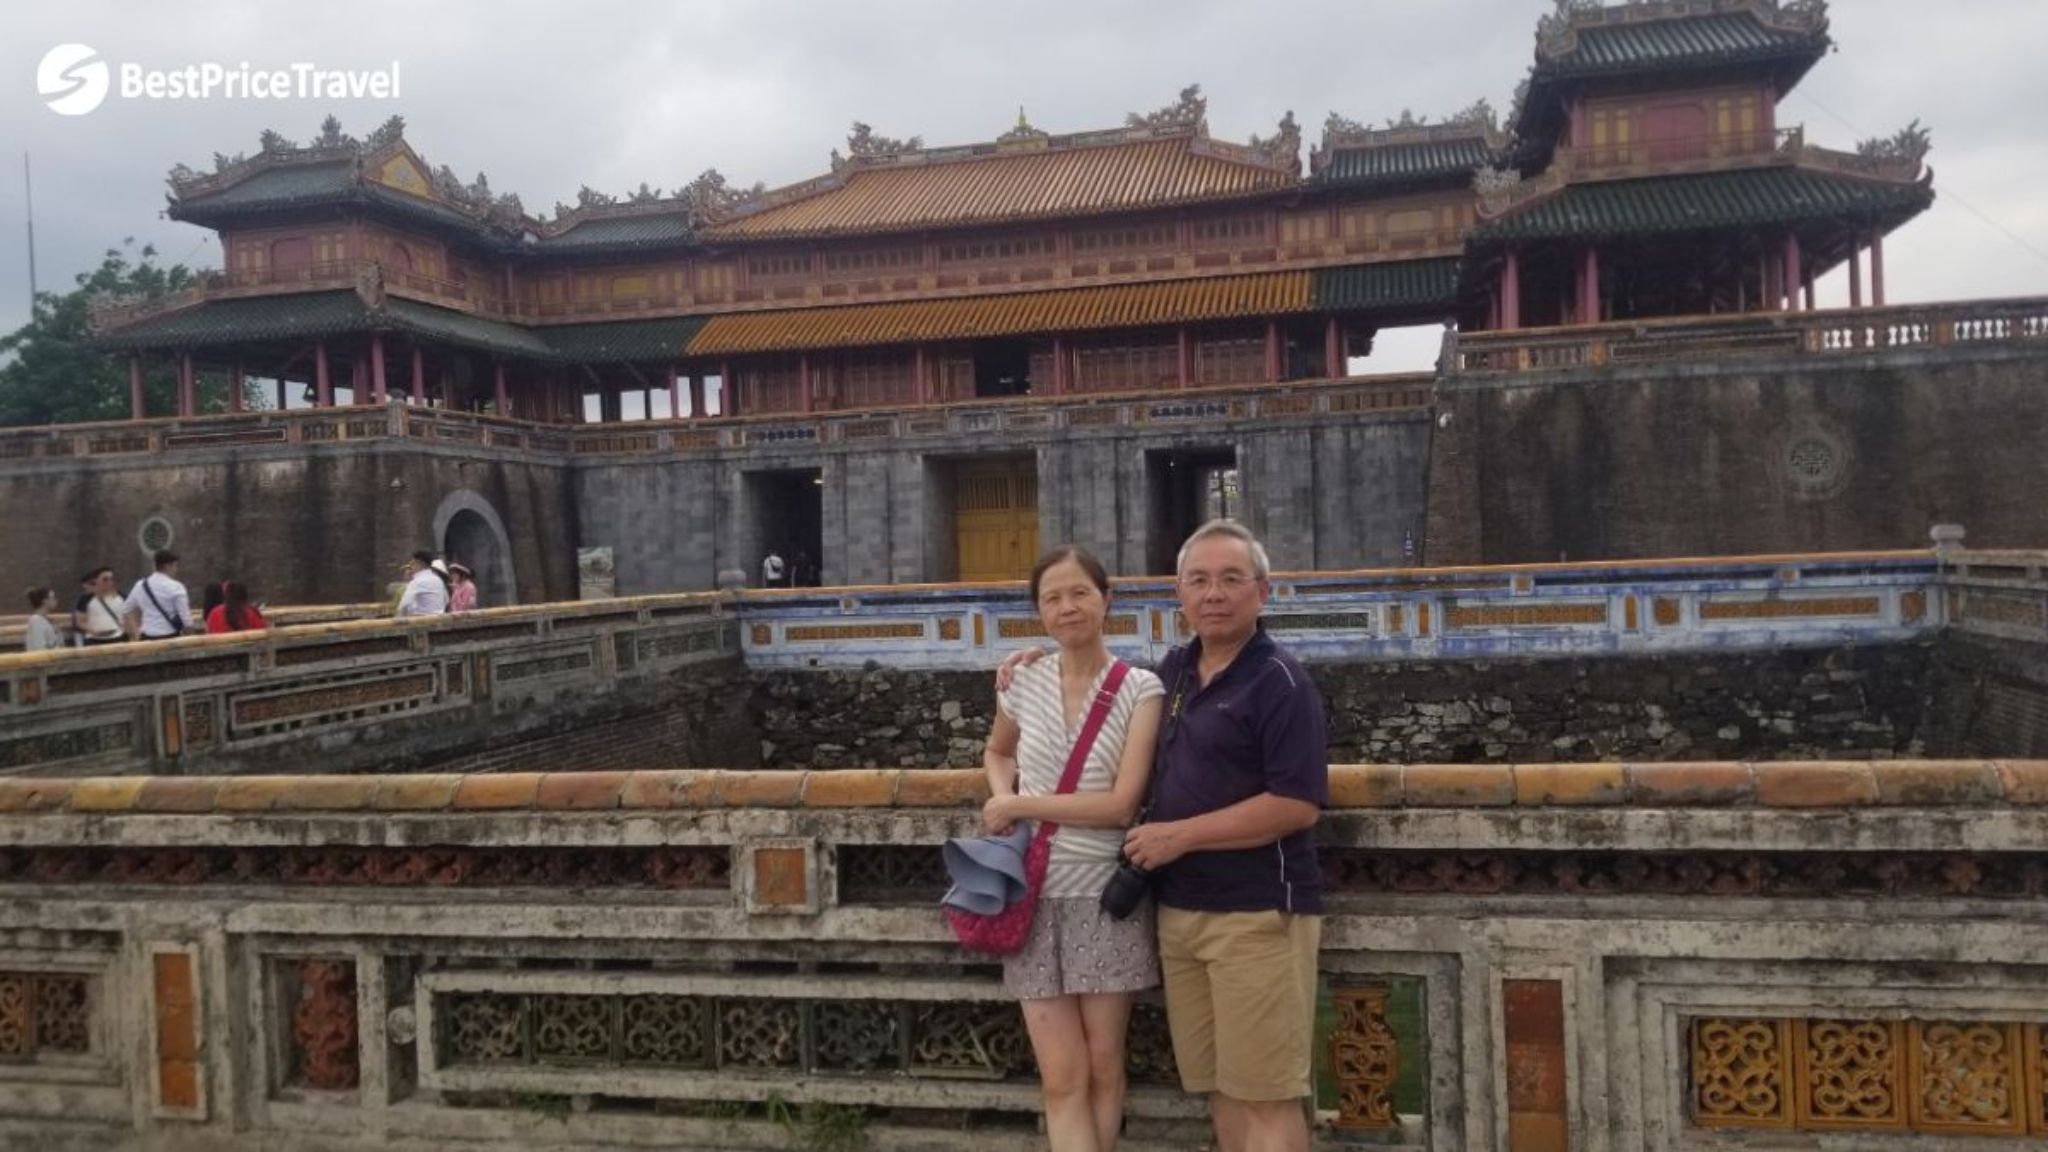 Day 9 Visit The Ancient Hue Imperial Citadel